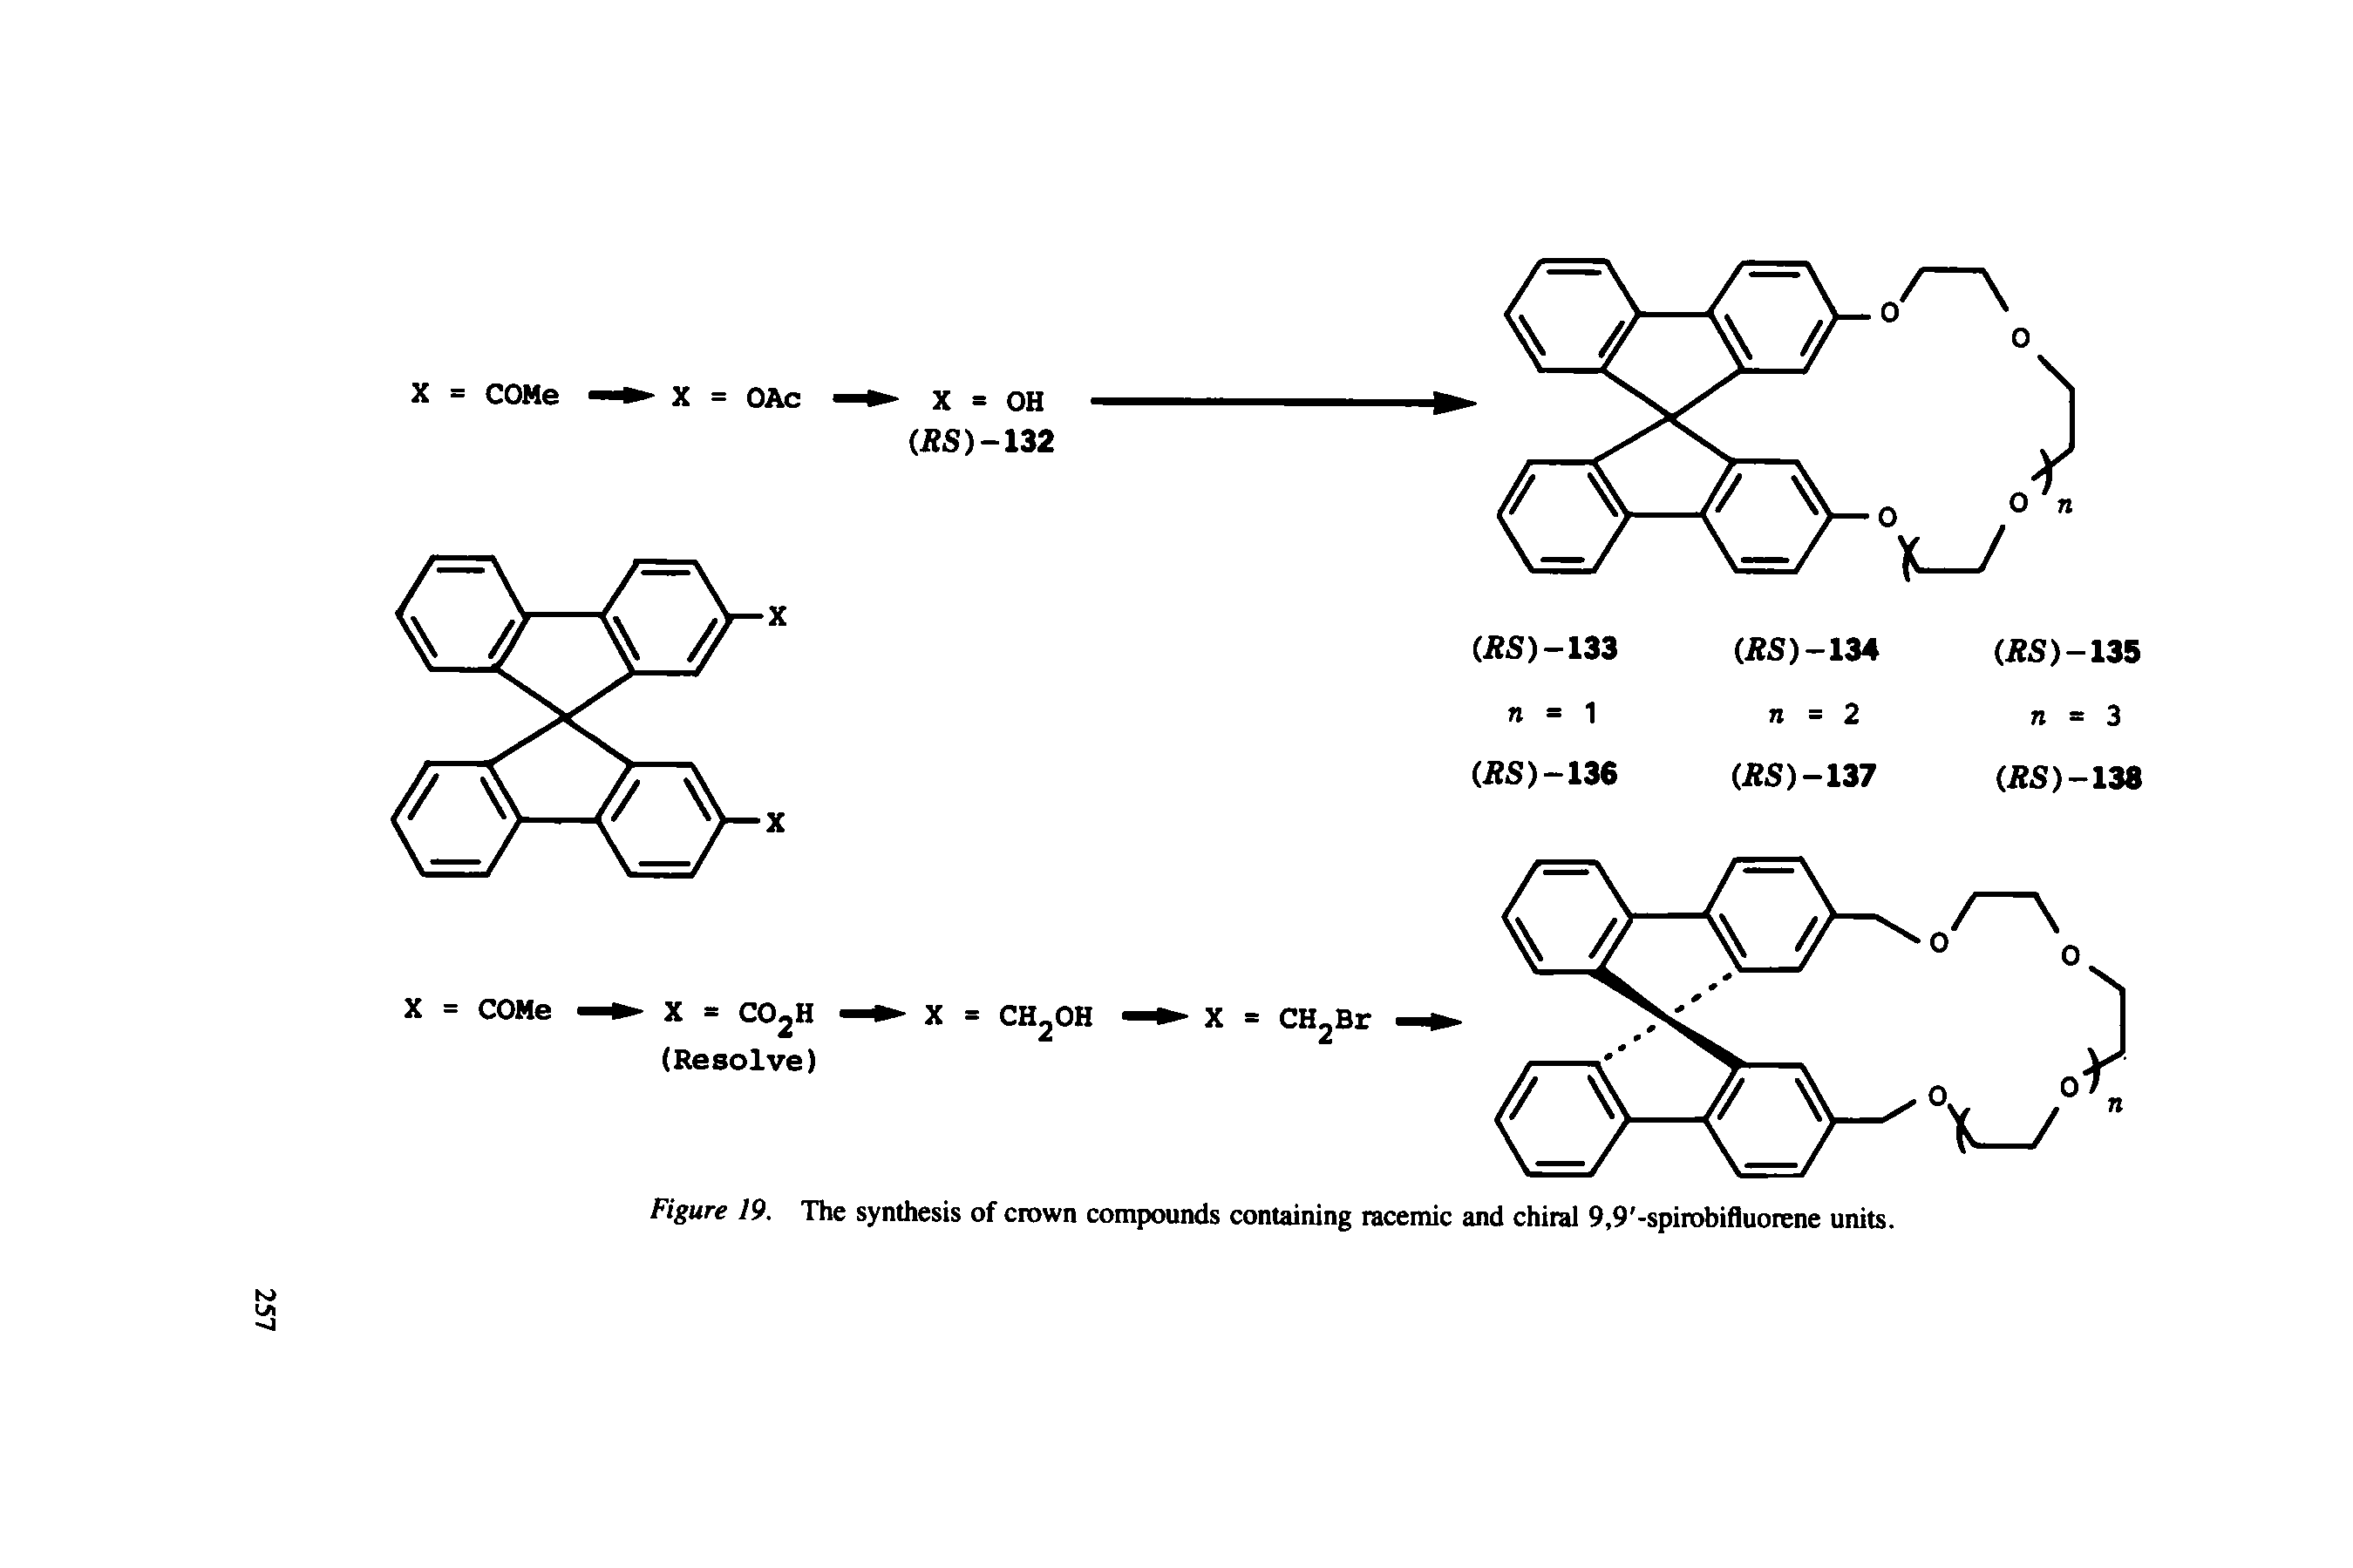 Figure 19. The synthesis of crown compounds containing racemic and chiral 9,9 -spirobifluorene units.